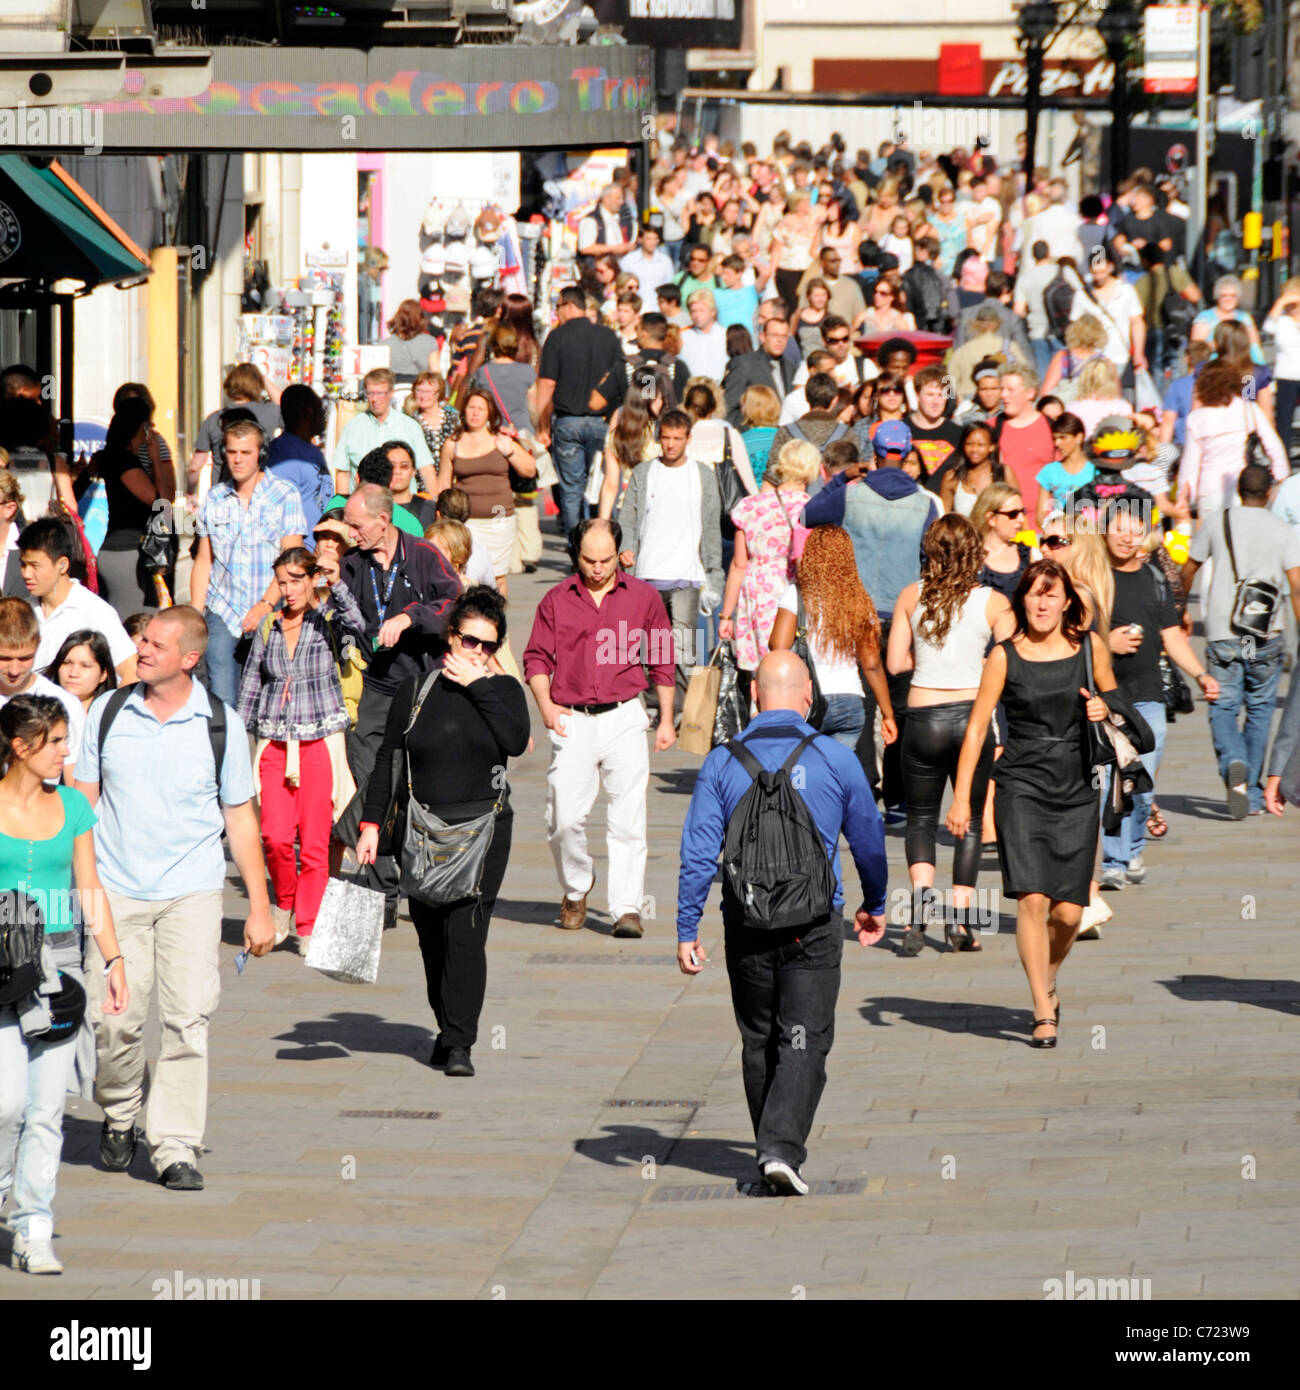 View from above crowd of people shoppers & tourists walking on busy pavement West End retail shopping street summer in London England UK Stock Photo